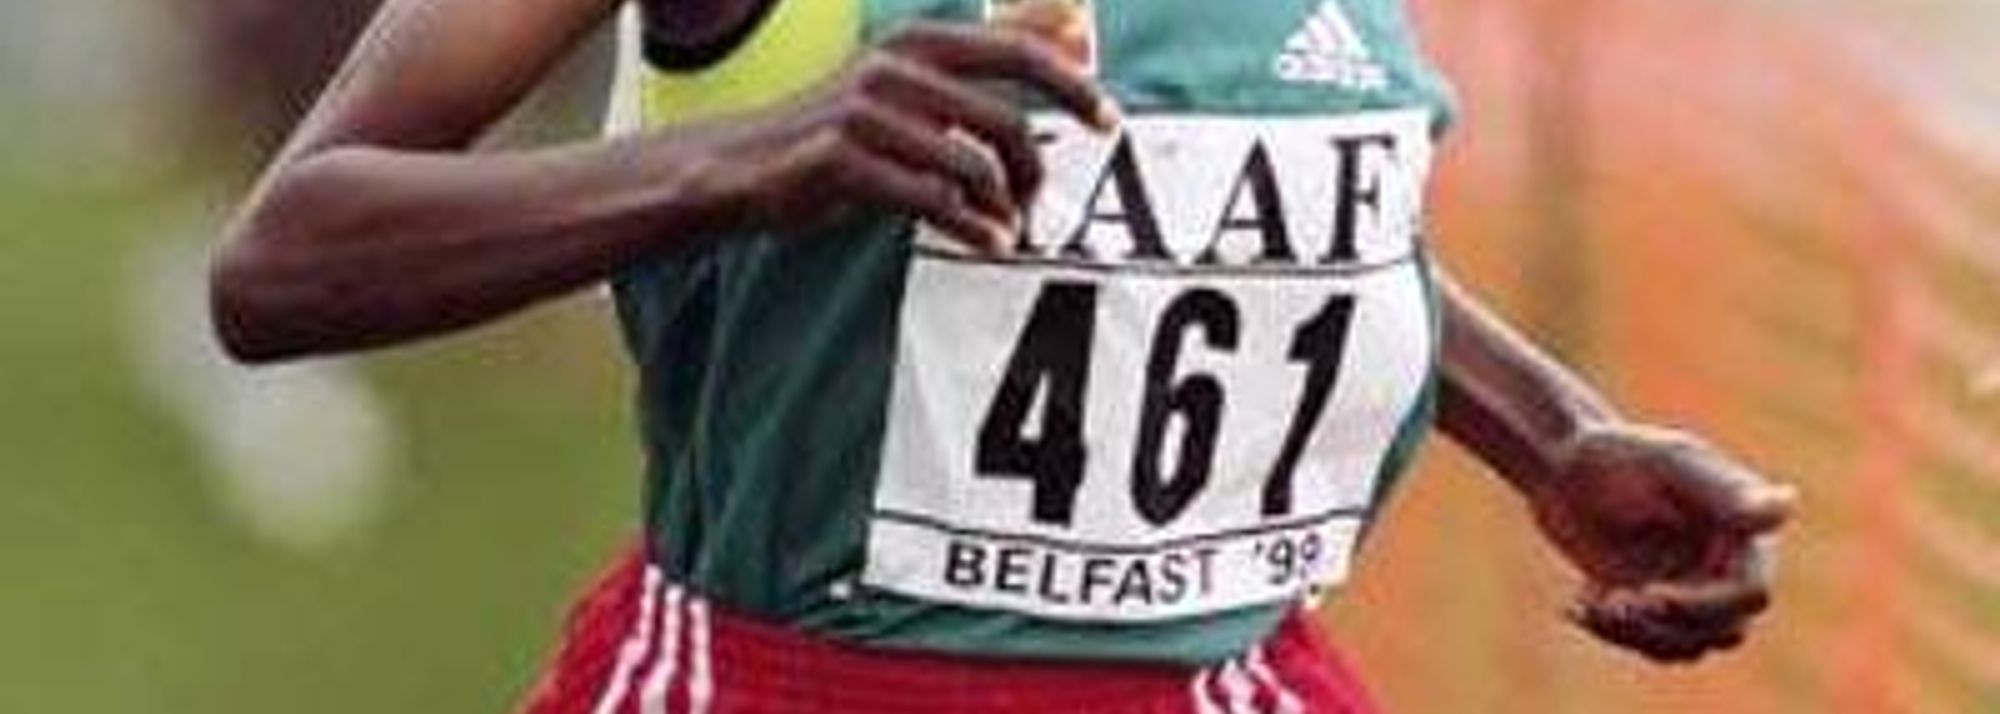 Newcastle, UK – A fascinating distance running duel is scheduled to occur, when Britain’s Paula Radcliffe the reigning double World Cross country champion, faces Ethiopia’s Gete Wami in the Great North Cross Country - IAAF Permit – on Sunday 4 January.